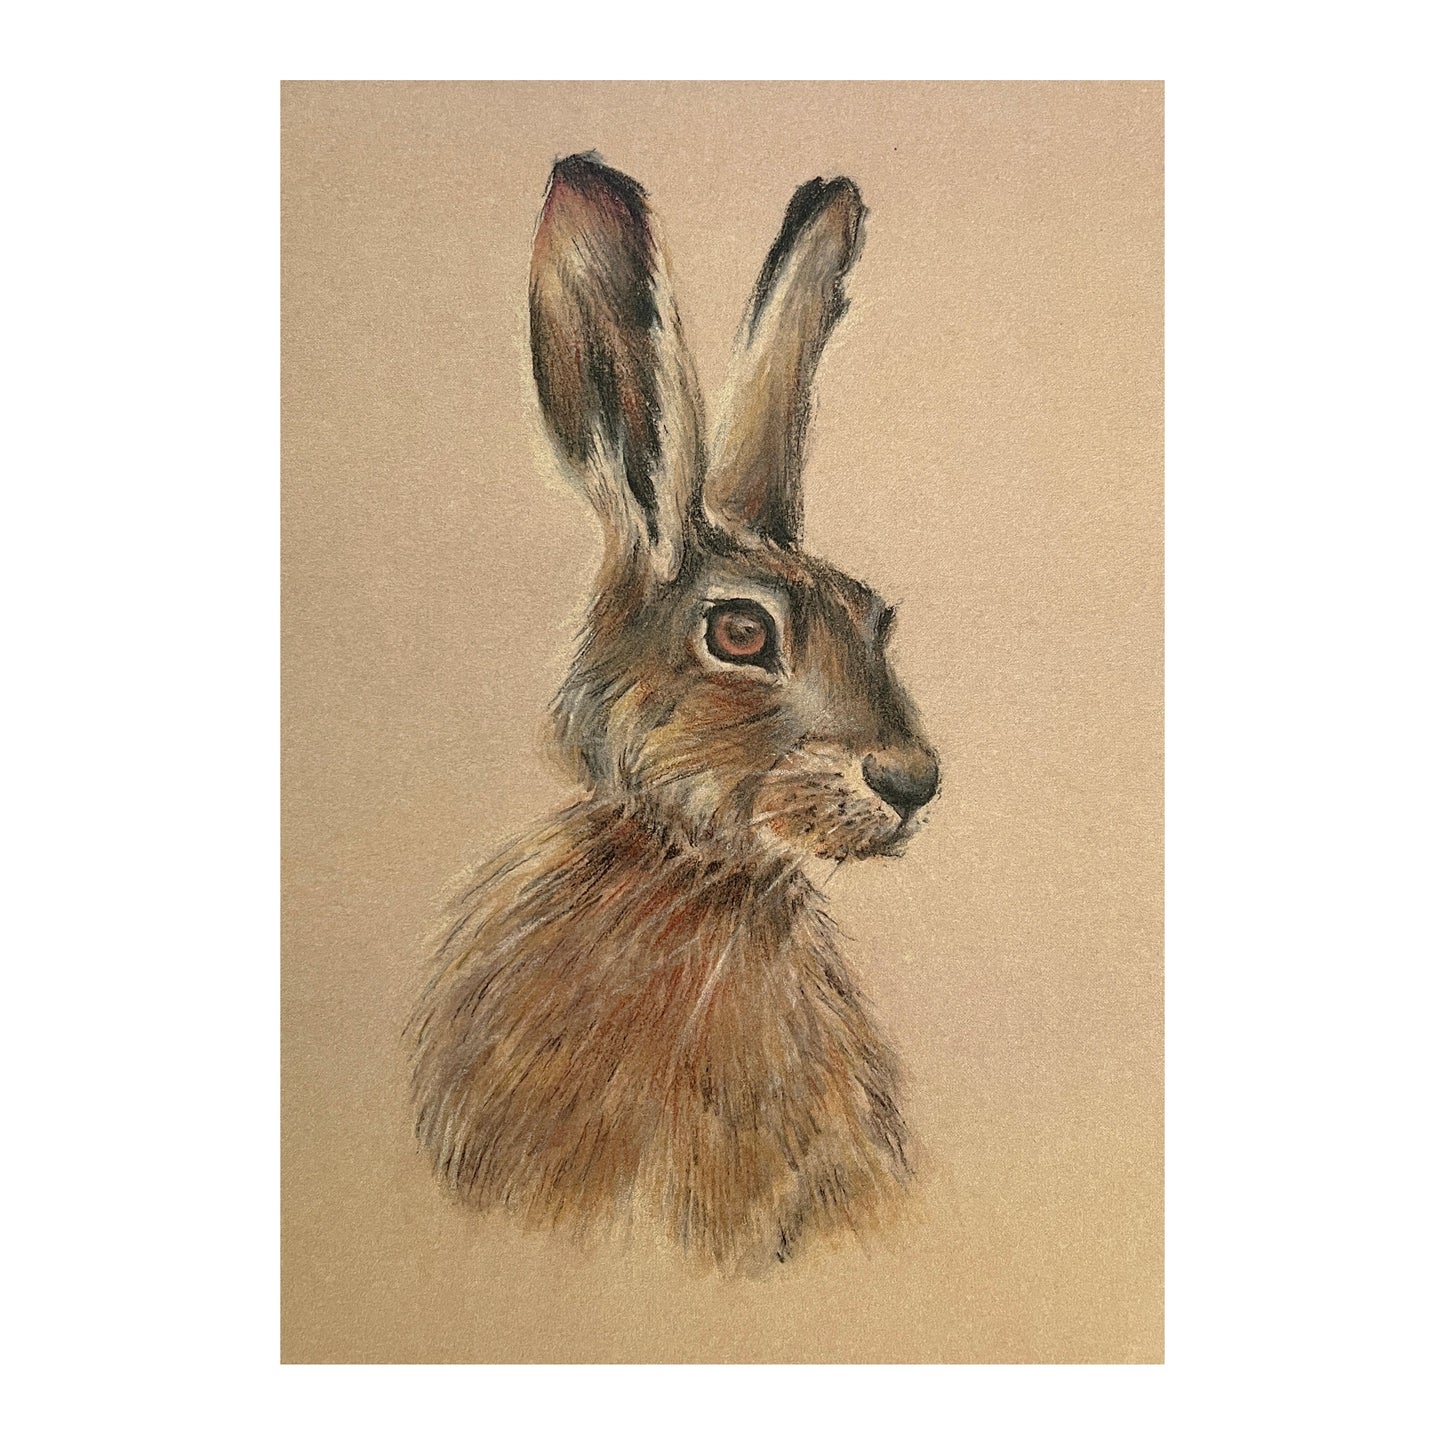 "Hare Head" Signed Limited Edition Giclée Print